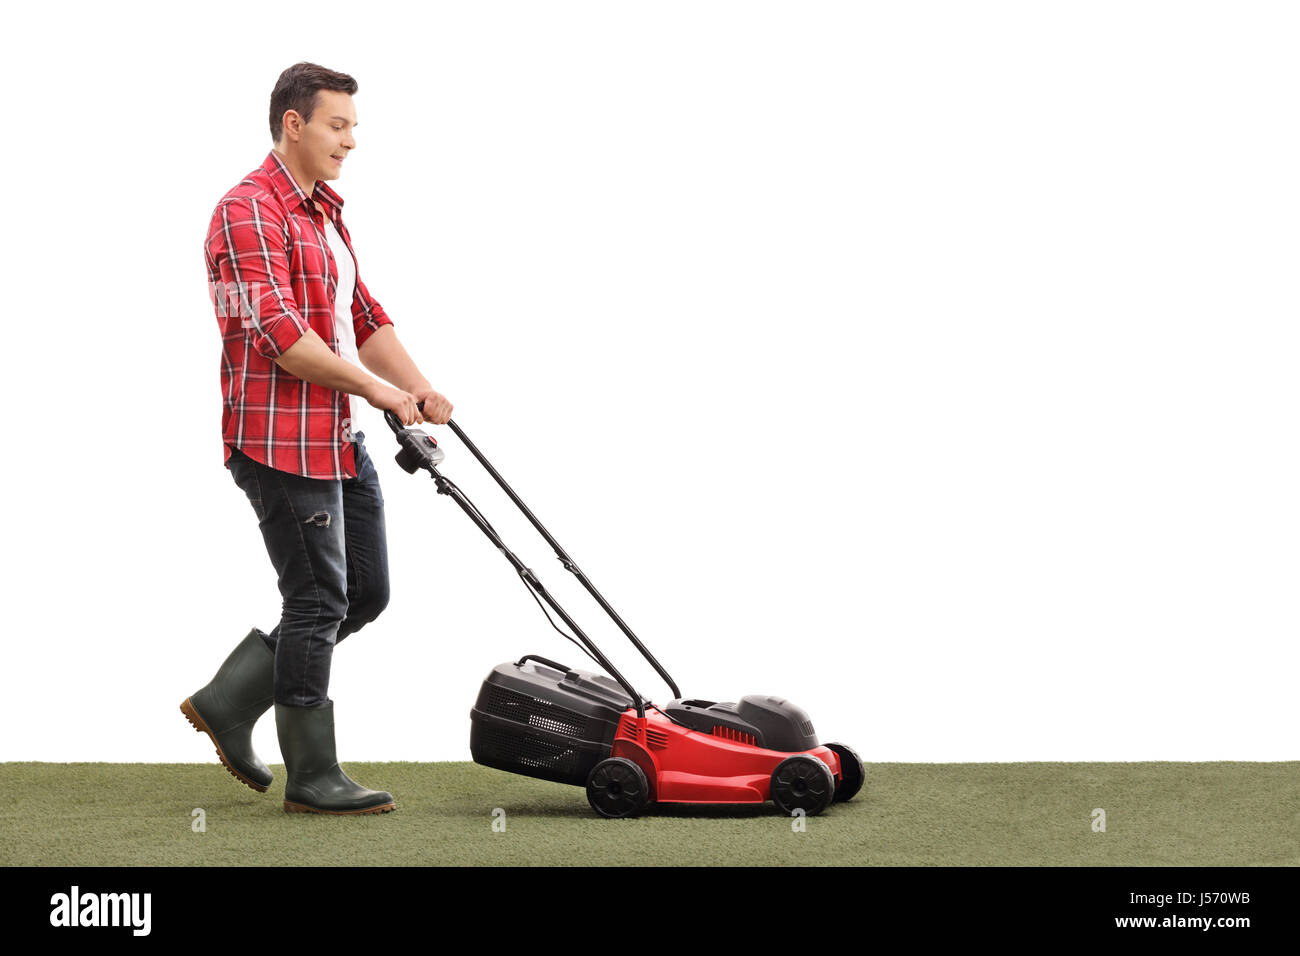 Full length profile shot of a gardener mowing a lawn with a lawnmower isolated on white background Stock Photo